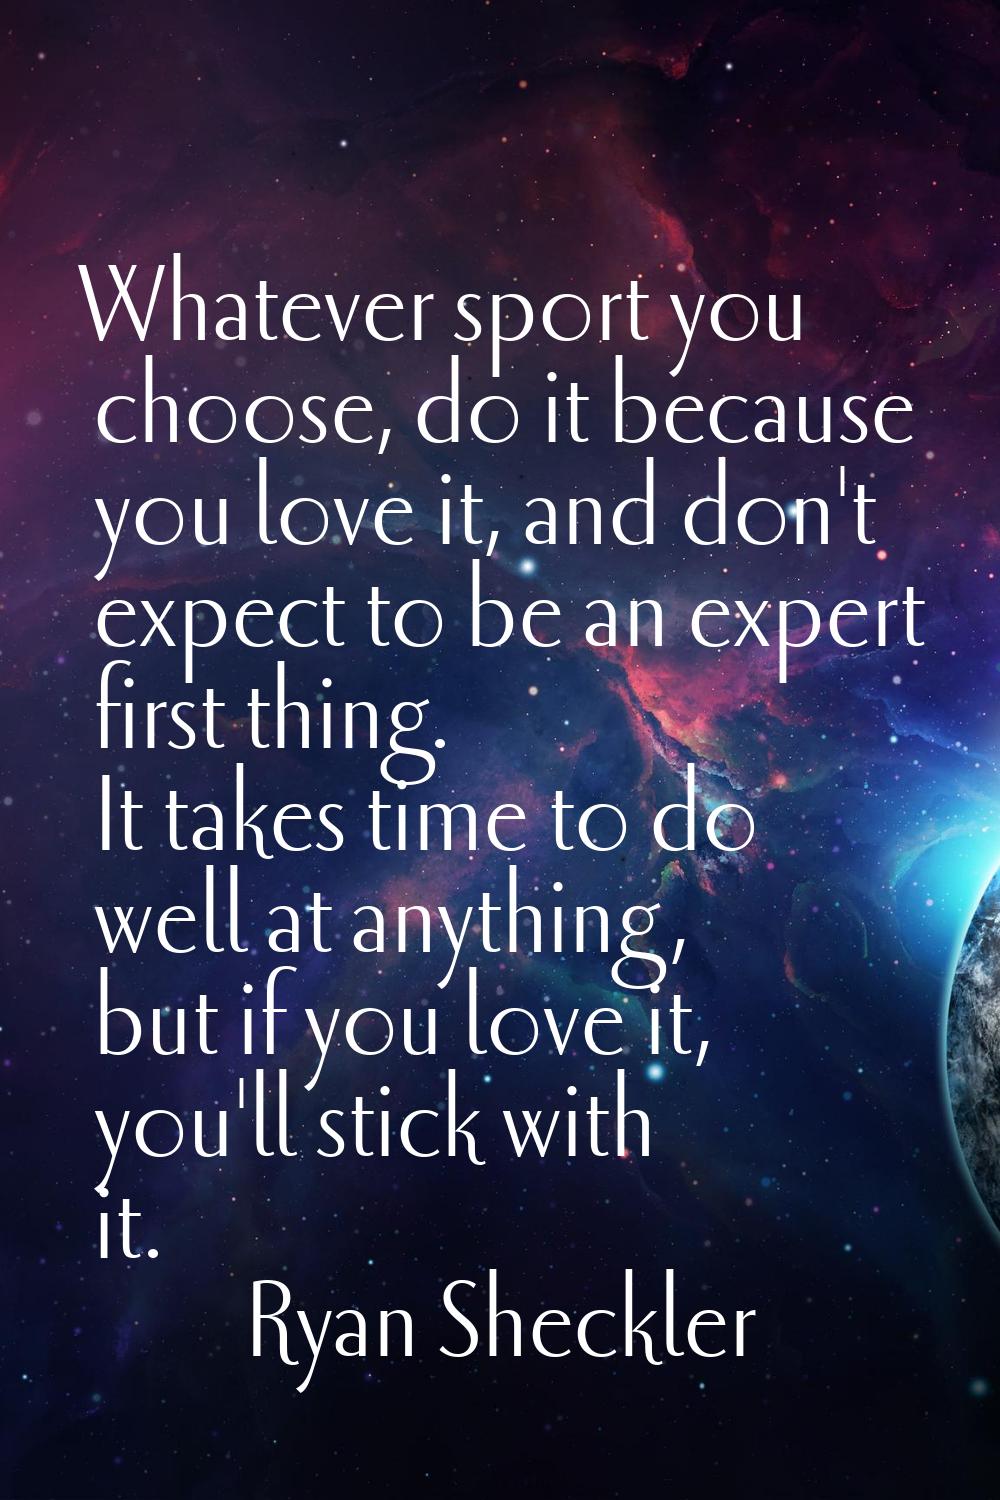 Whatever sport you choose, do it because you love it, and don't expect to be an expert first thing.